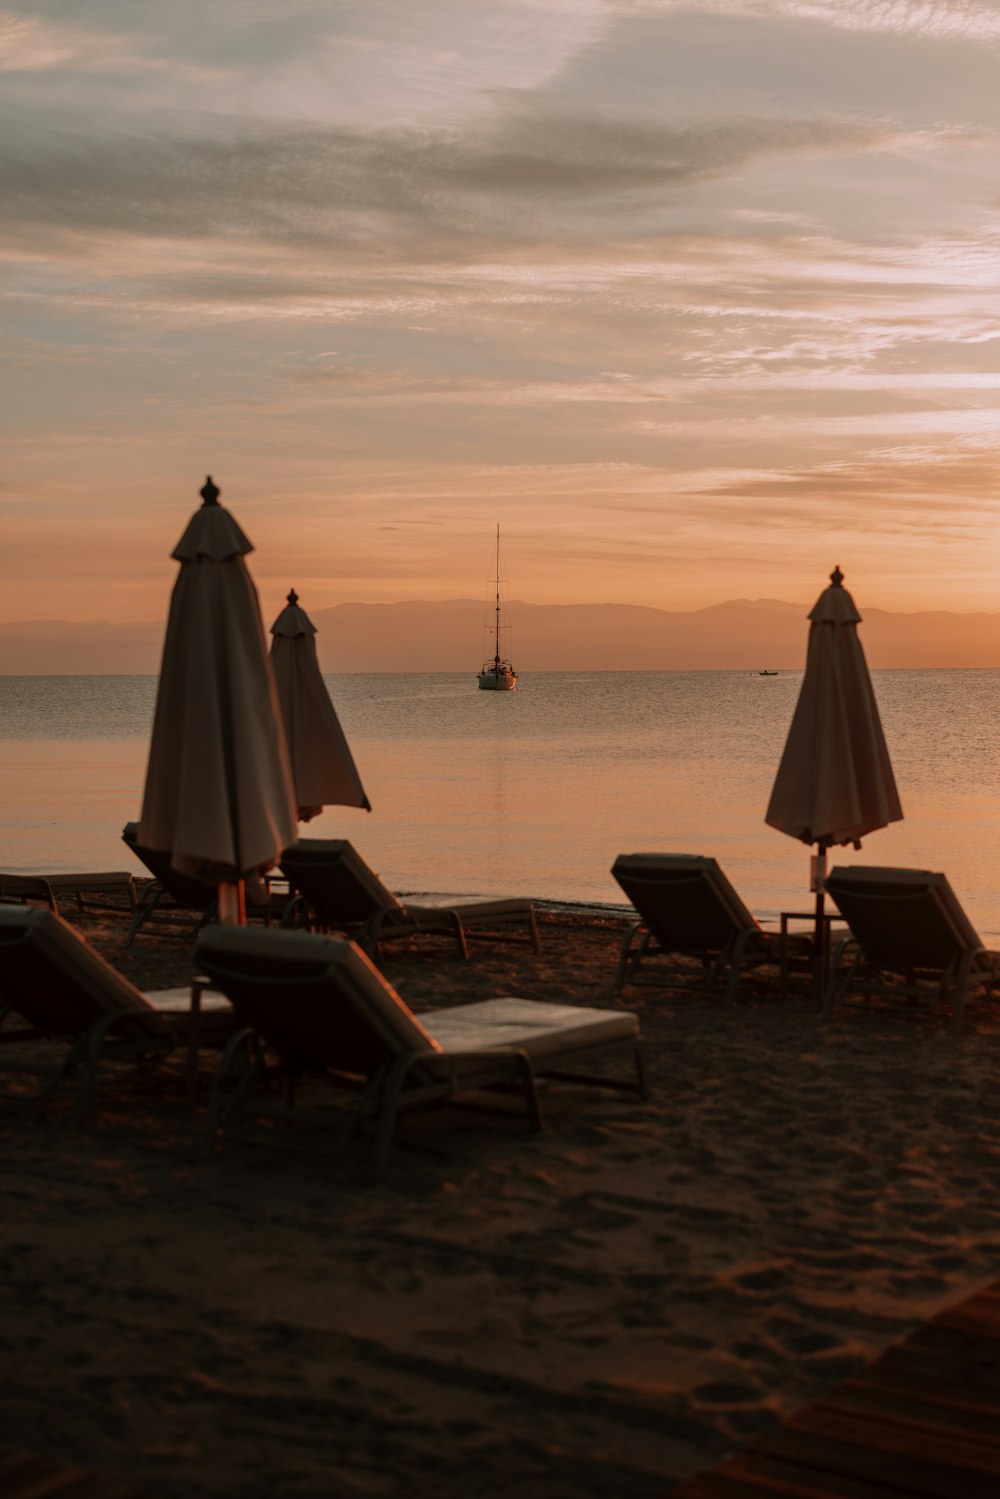 lounge chairs and umbrellas on a beach at sunset